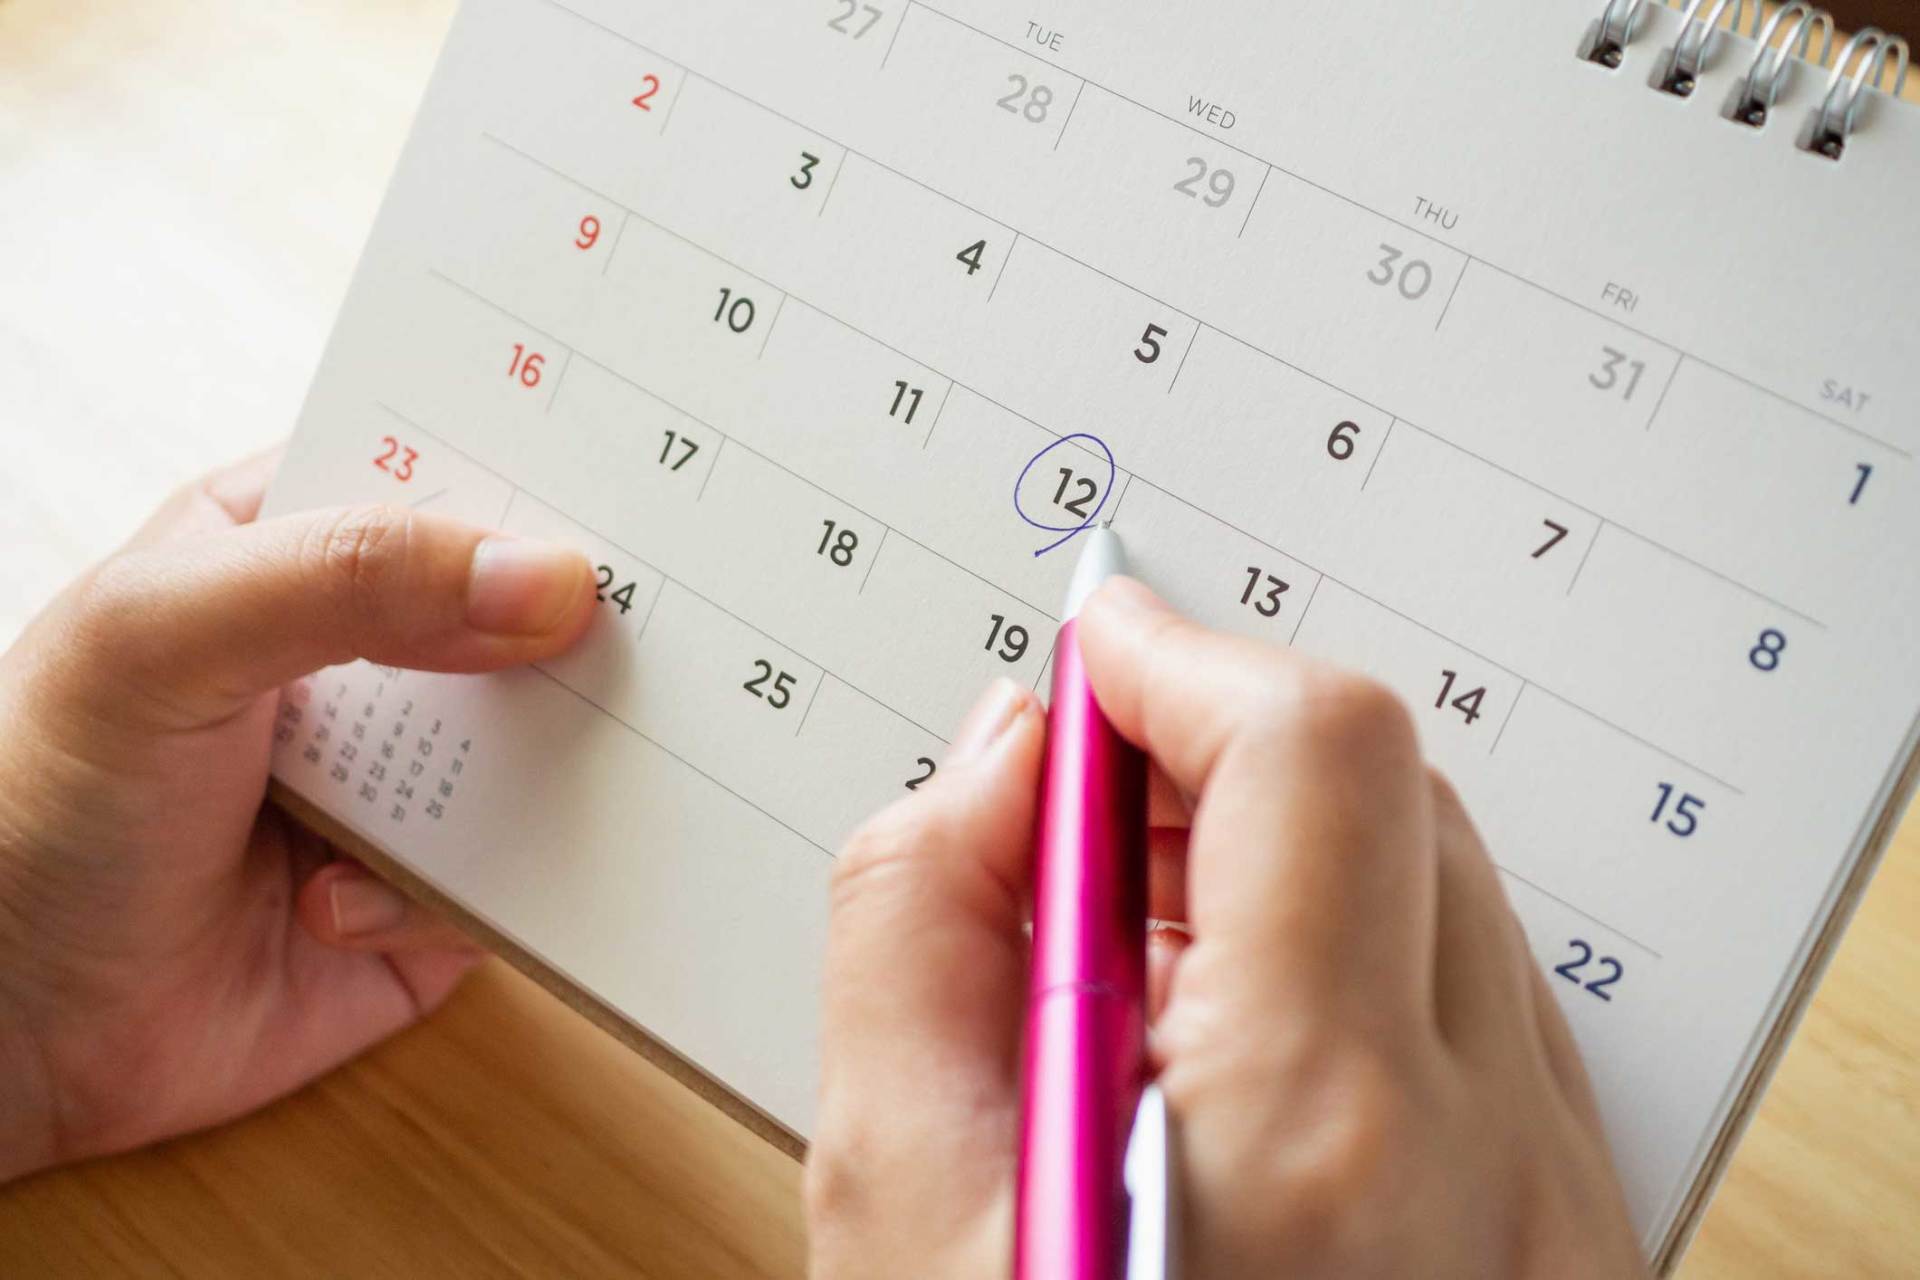 Probate Law — Saving The Date On The Calendar In Clearwater, FL